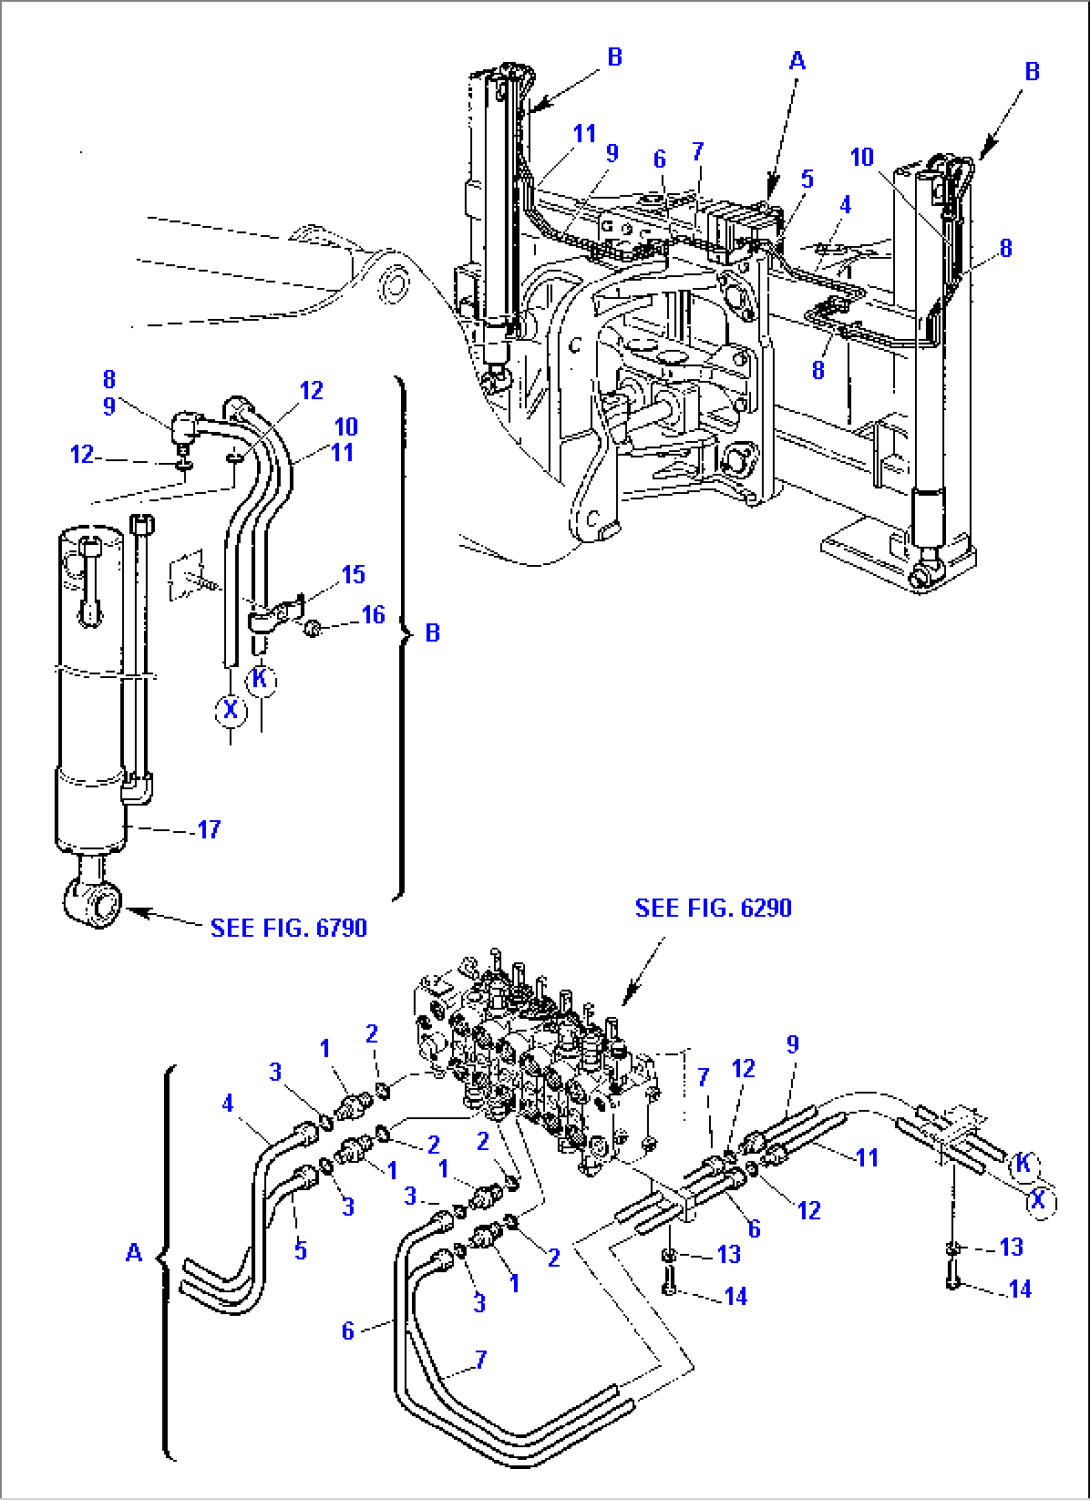 HYDRAULIC PIPING (VERTICAL OUTRIGGER CYLINDER LINE)